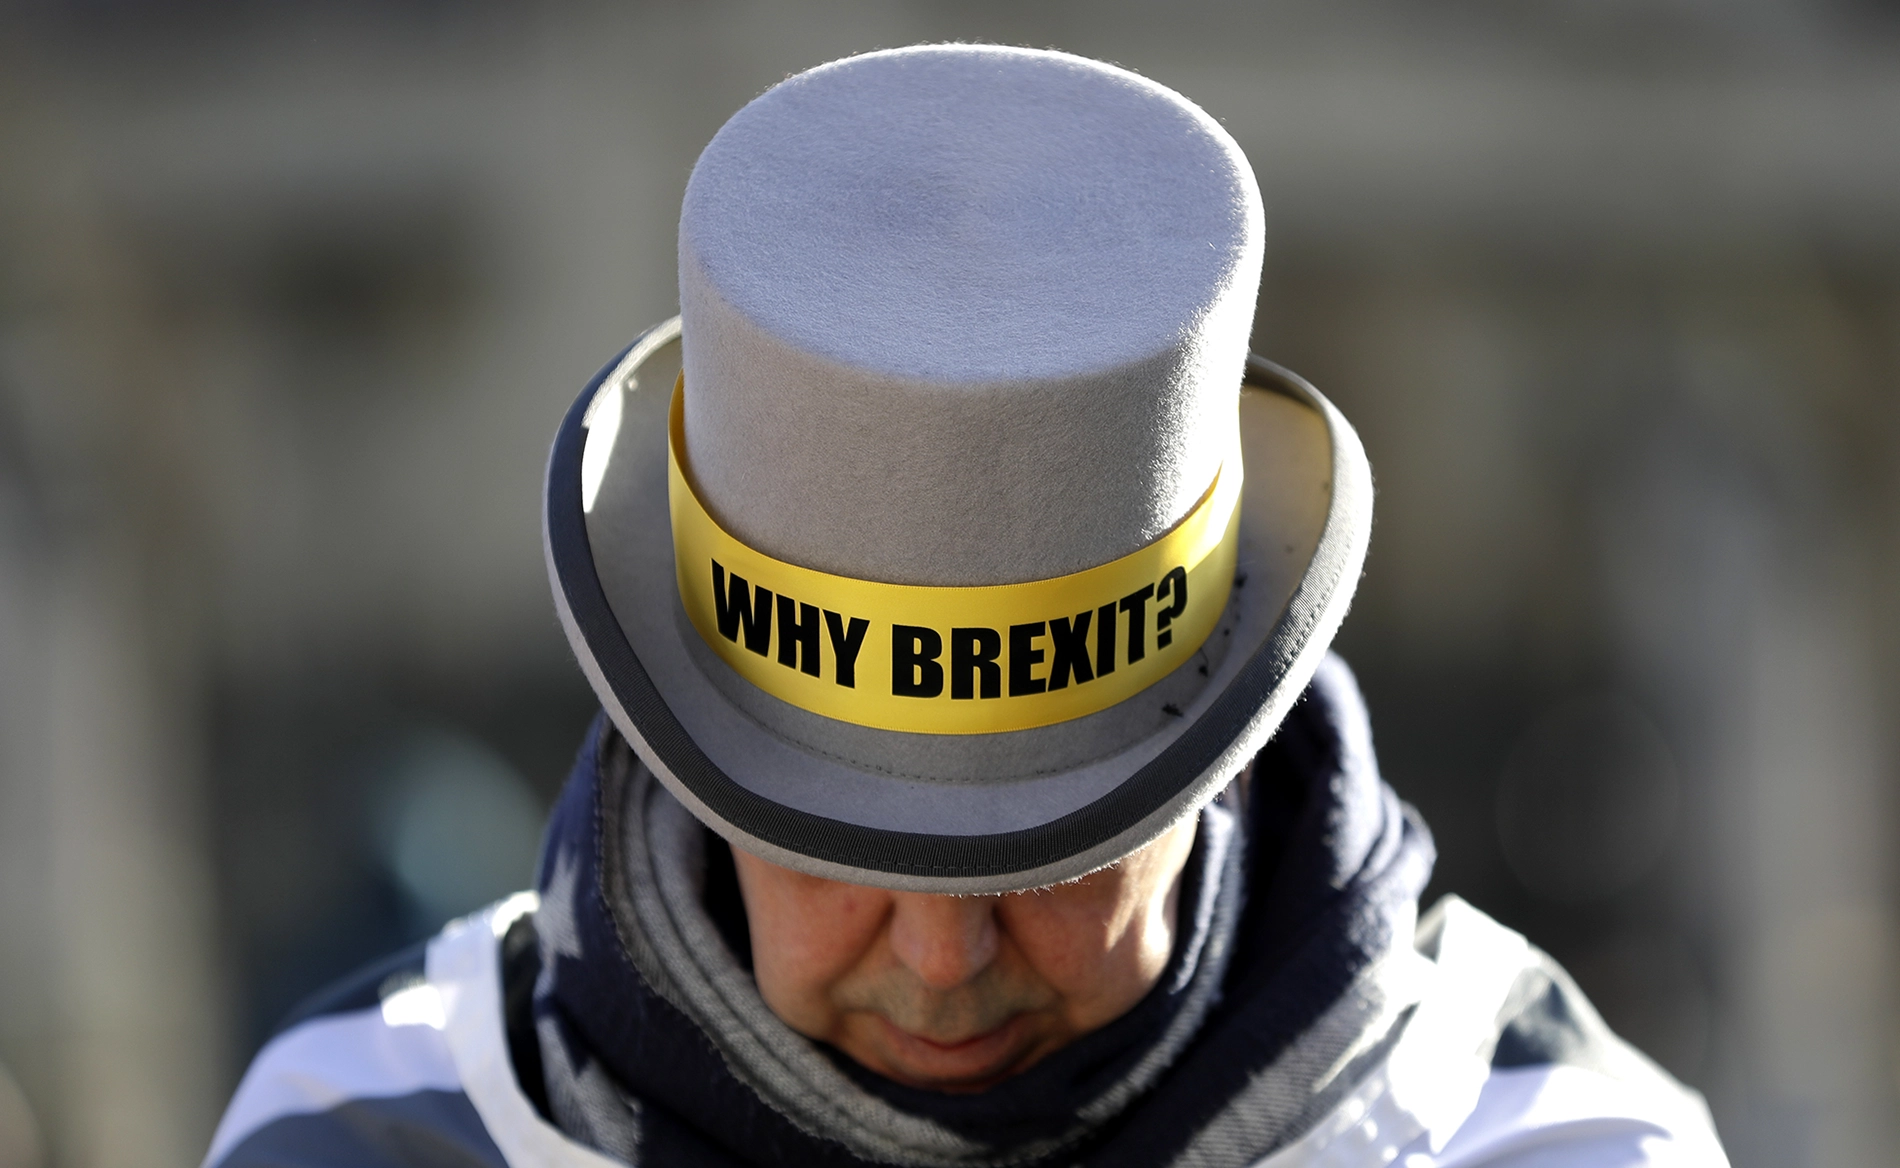 Man wearing a hat printed with “Why Brexit?”, Picture-Alliance / ASSOCIATED PRESS | Kirsty Wigglesworth